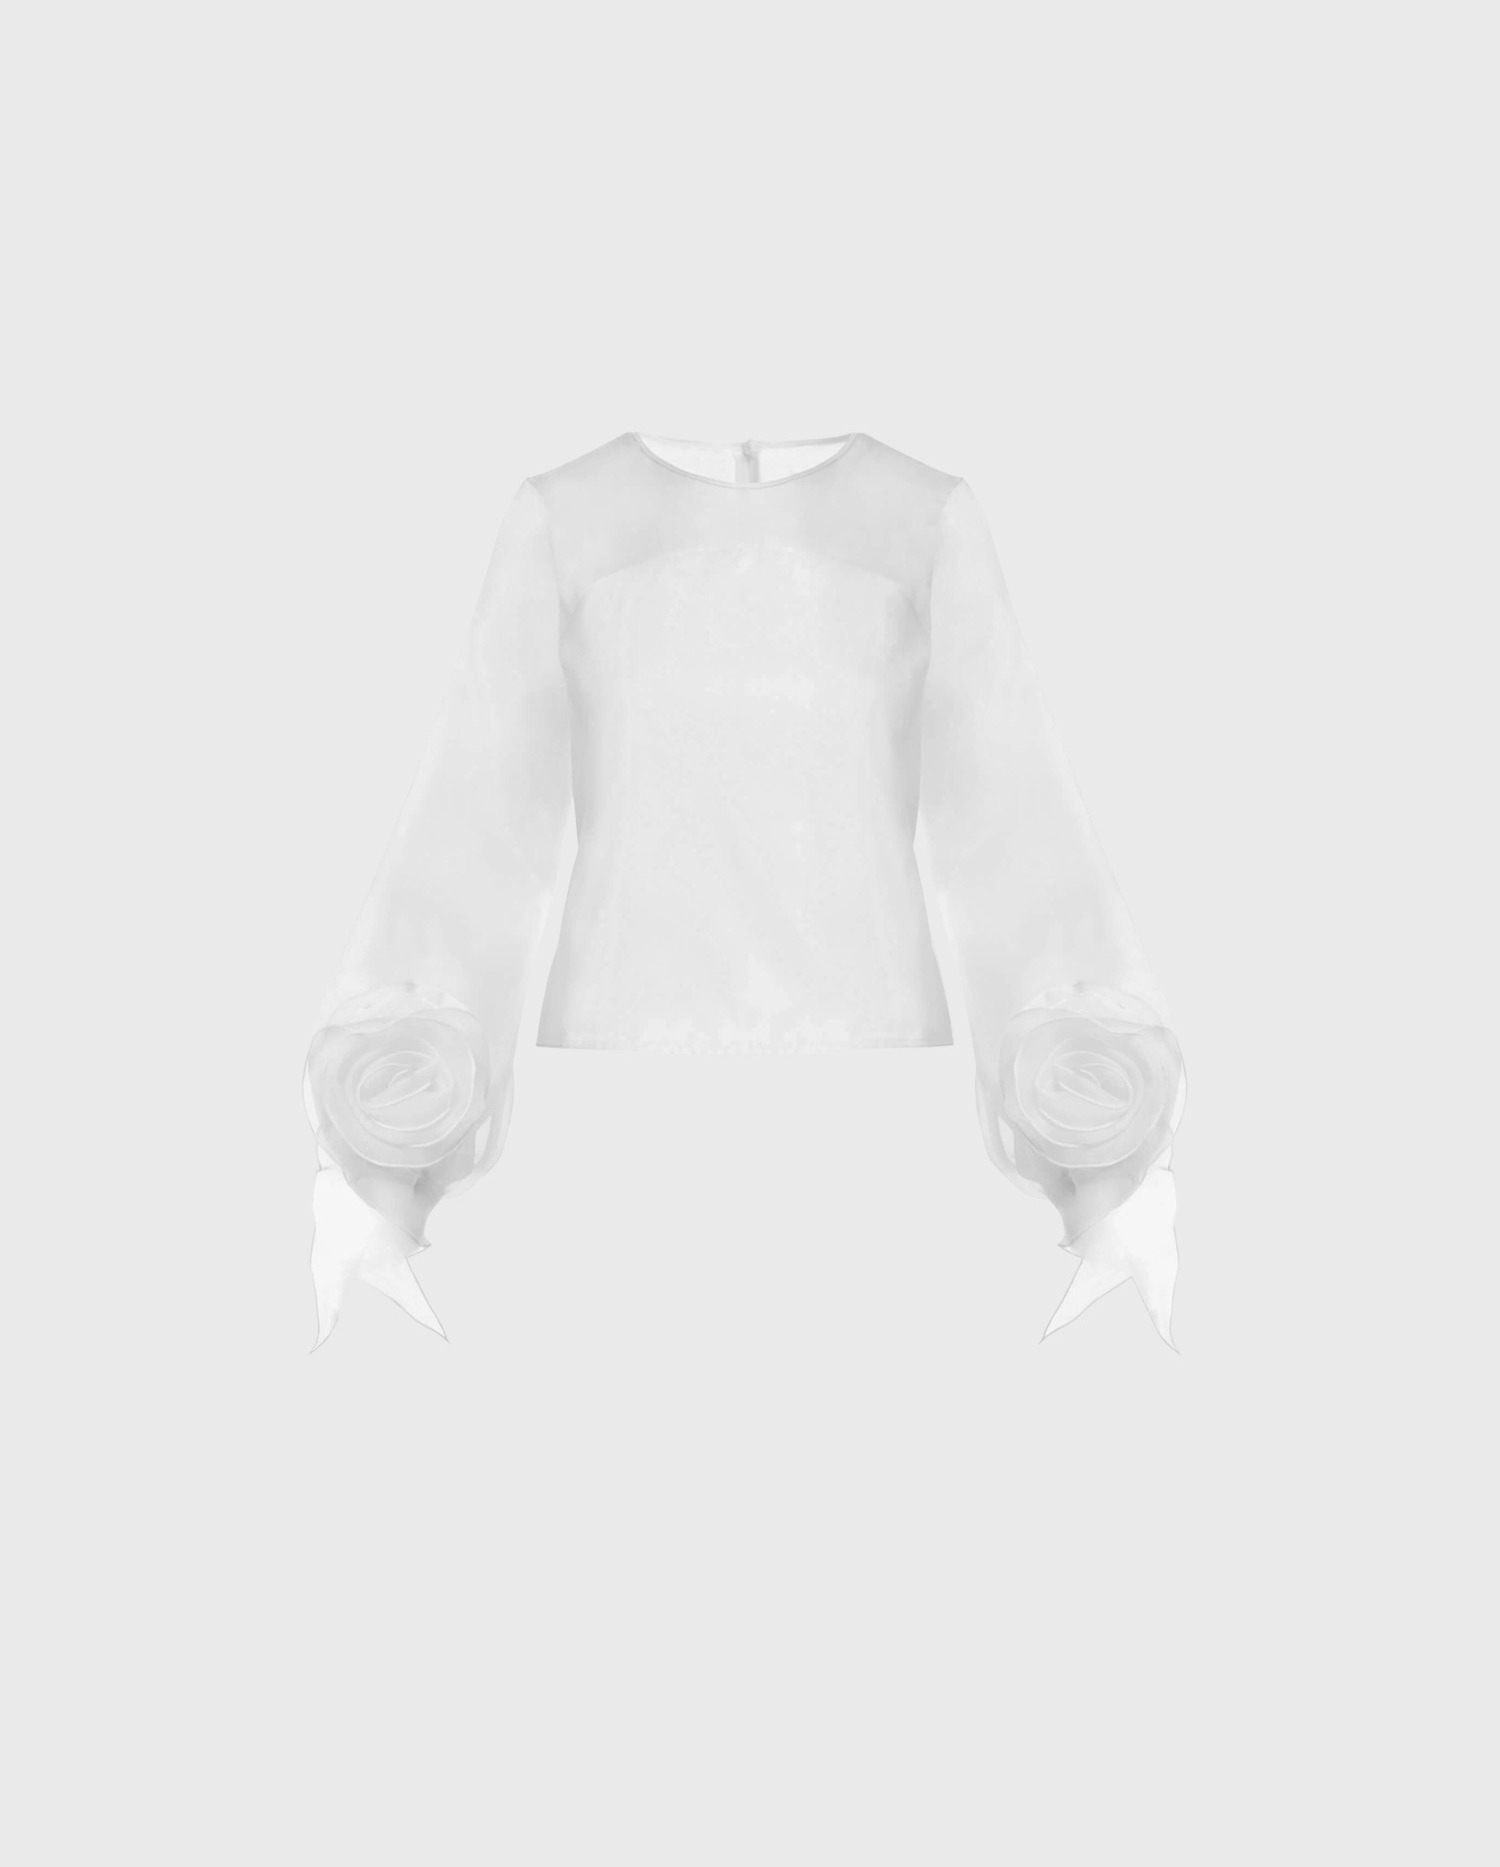 Discover The SPRING Long Sleeve Silk Organza Blouse From ANNE FONTAINE